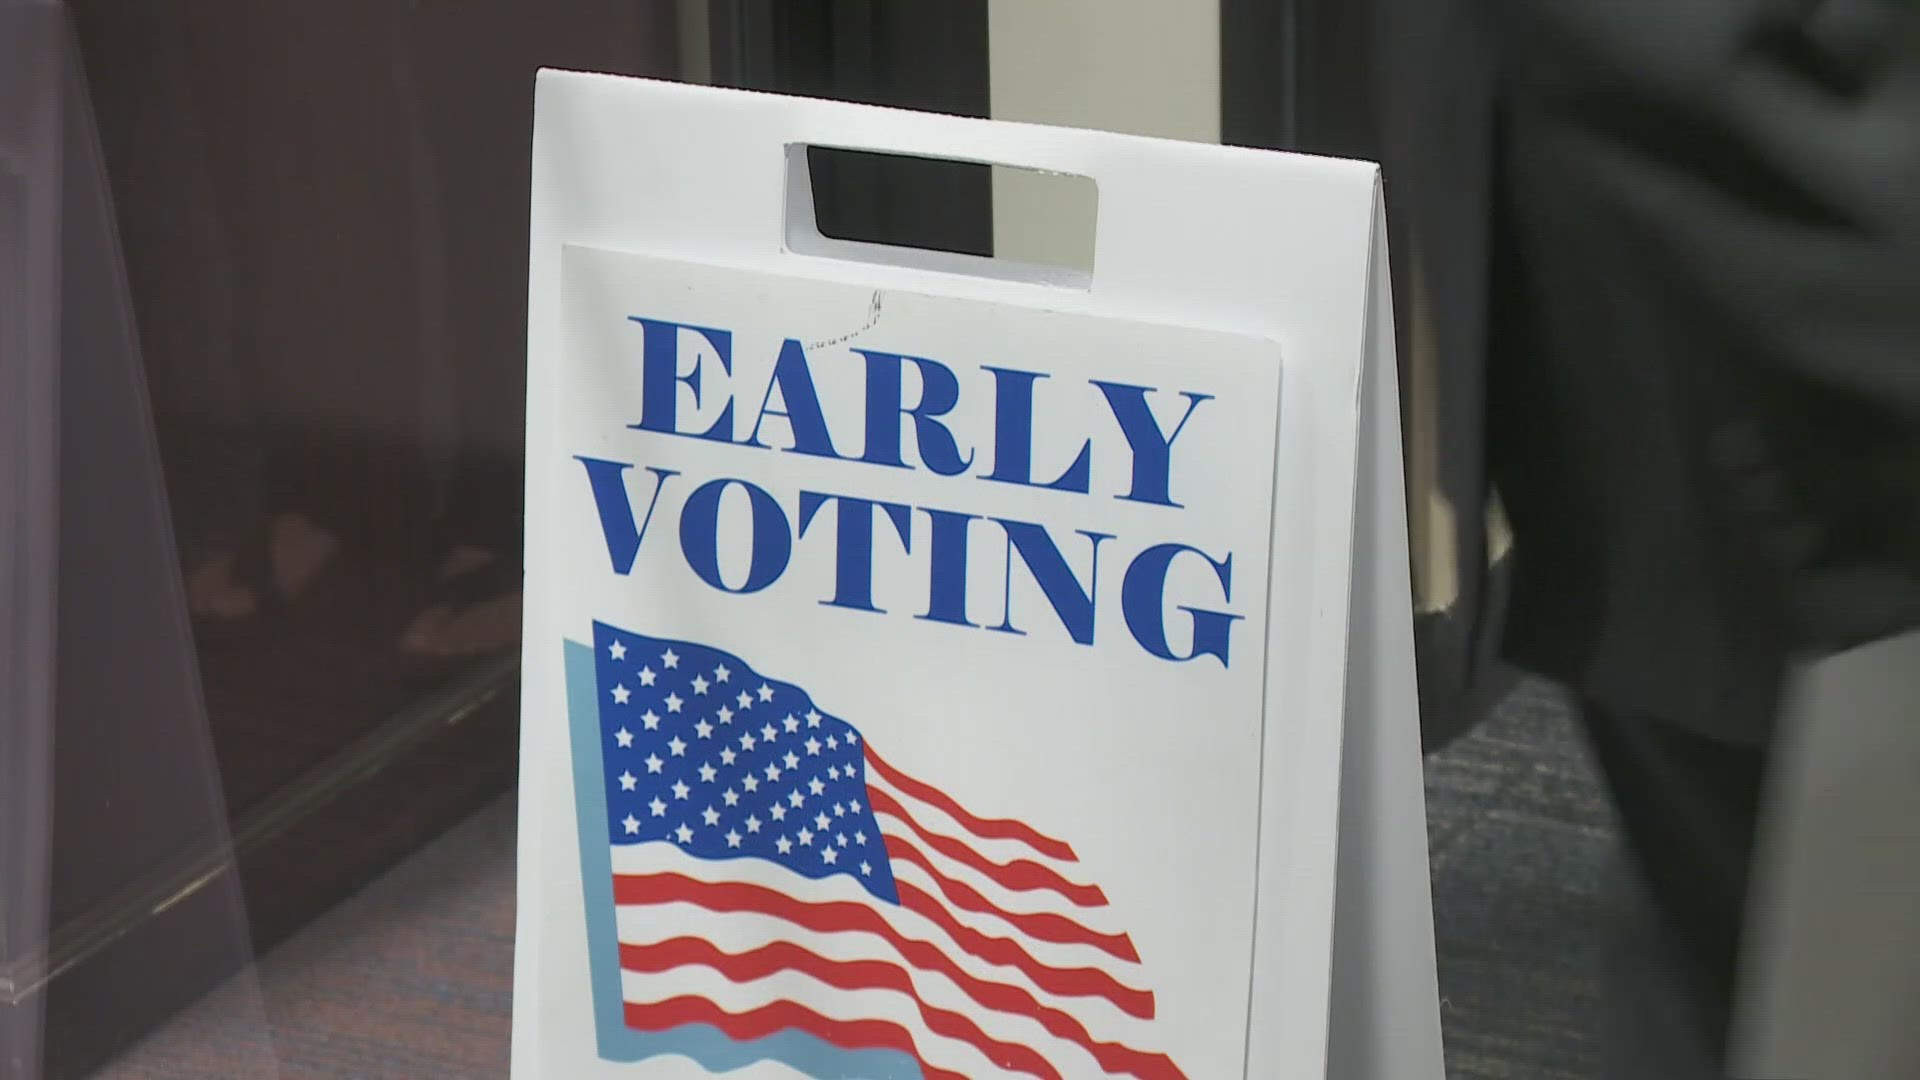 The polls are open from 7 a.m. to 8 p.m. Saturday.